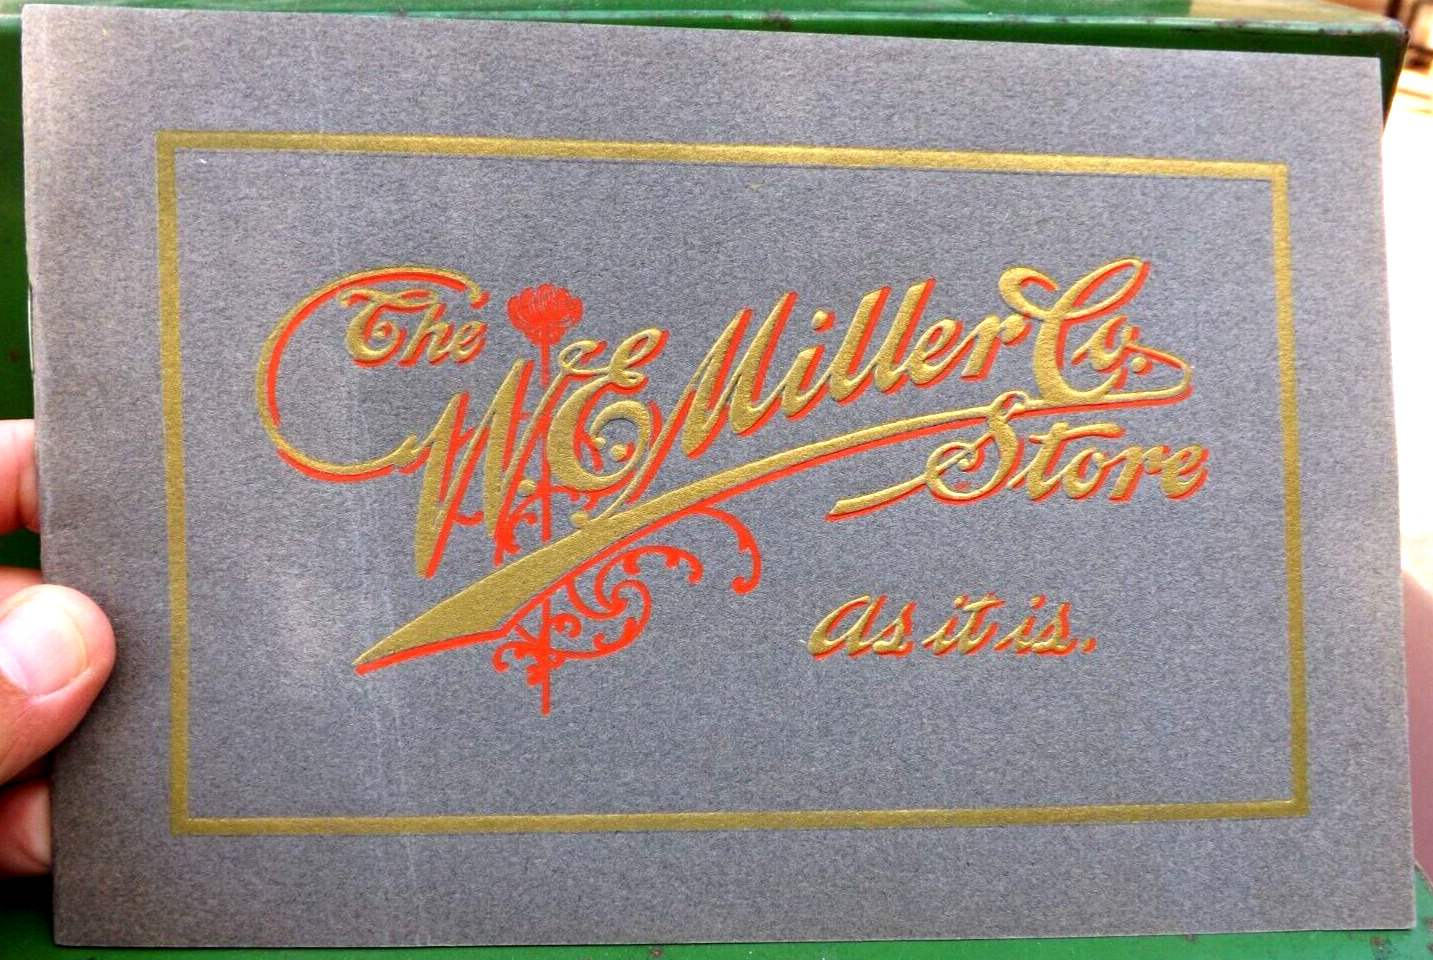 VINTAGE 1902 W.E. MILLER STORE WINCHESTER INDIANA DRY GOODS PROMO BOOKLET PHOTOS